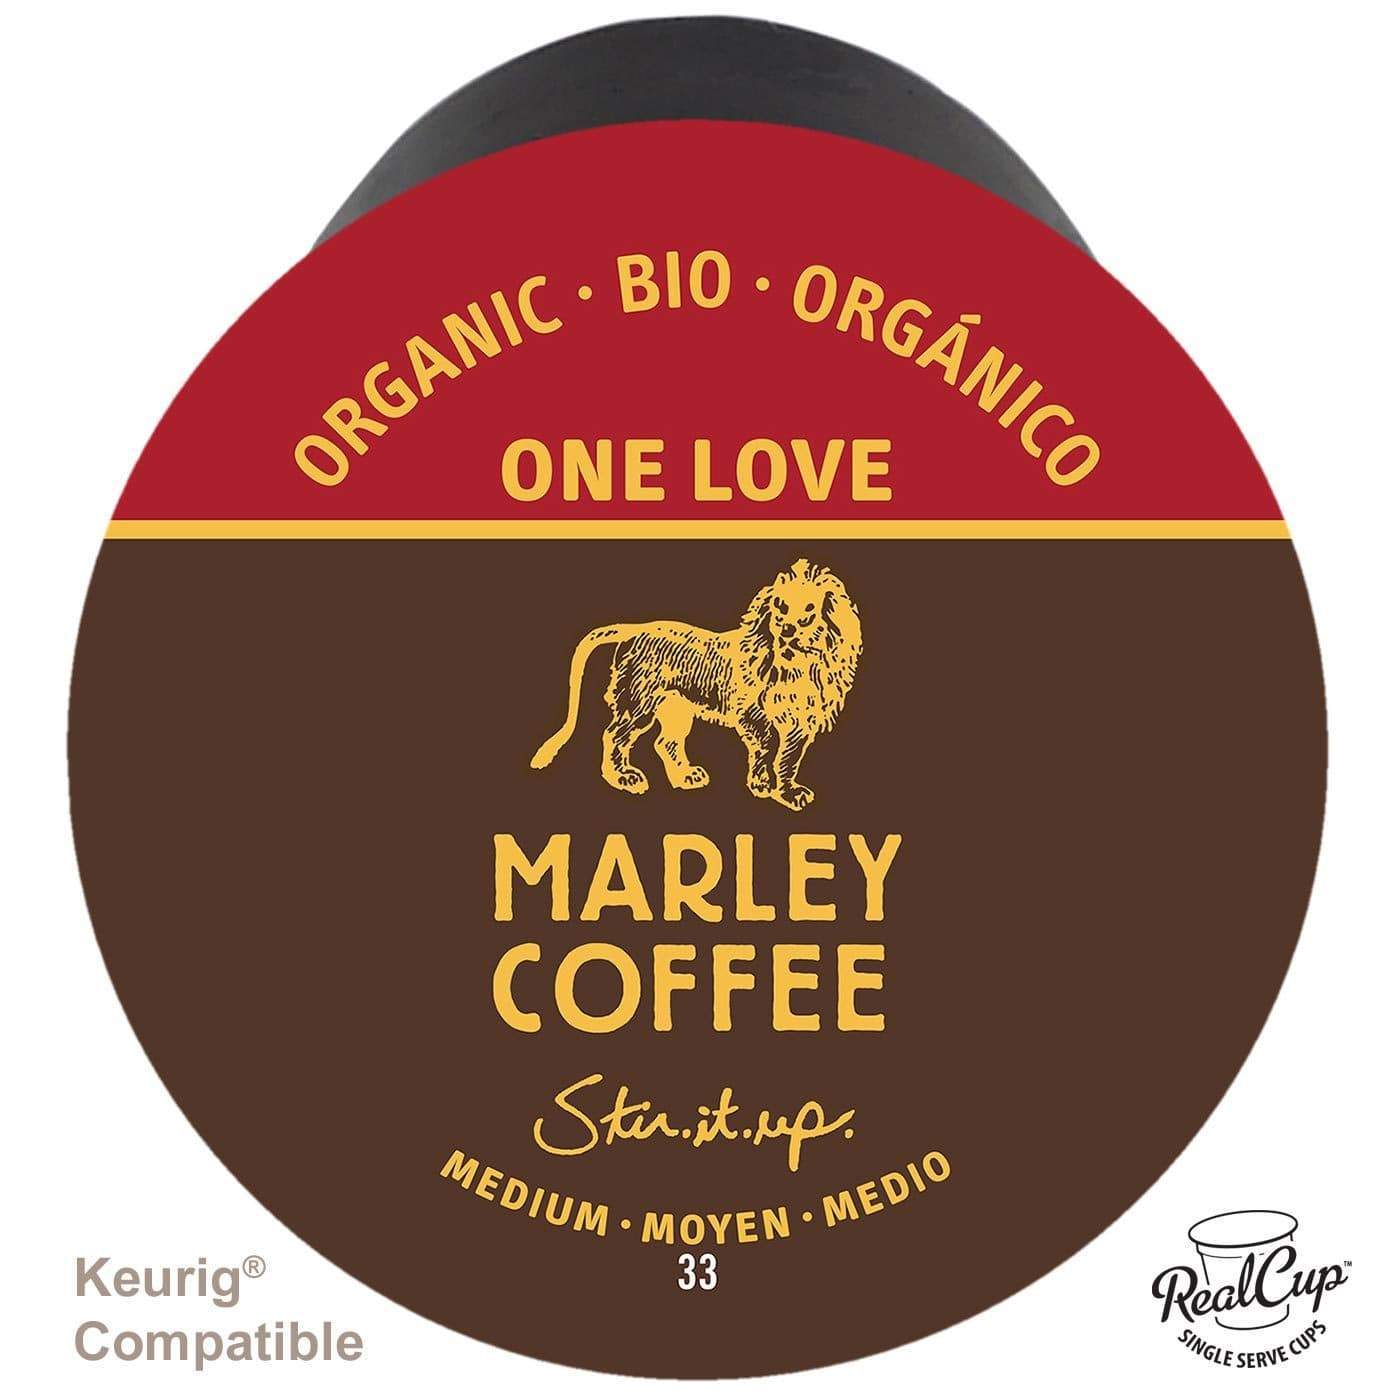 MARLEY® "One Love" 100% Ethiopian Coffee Pods (24 ct)